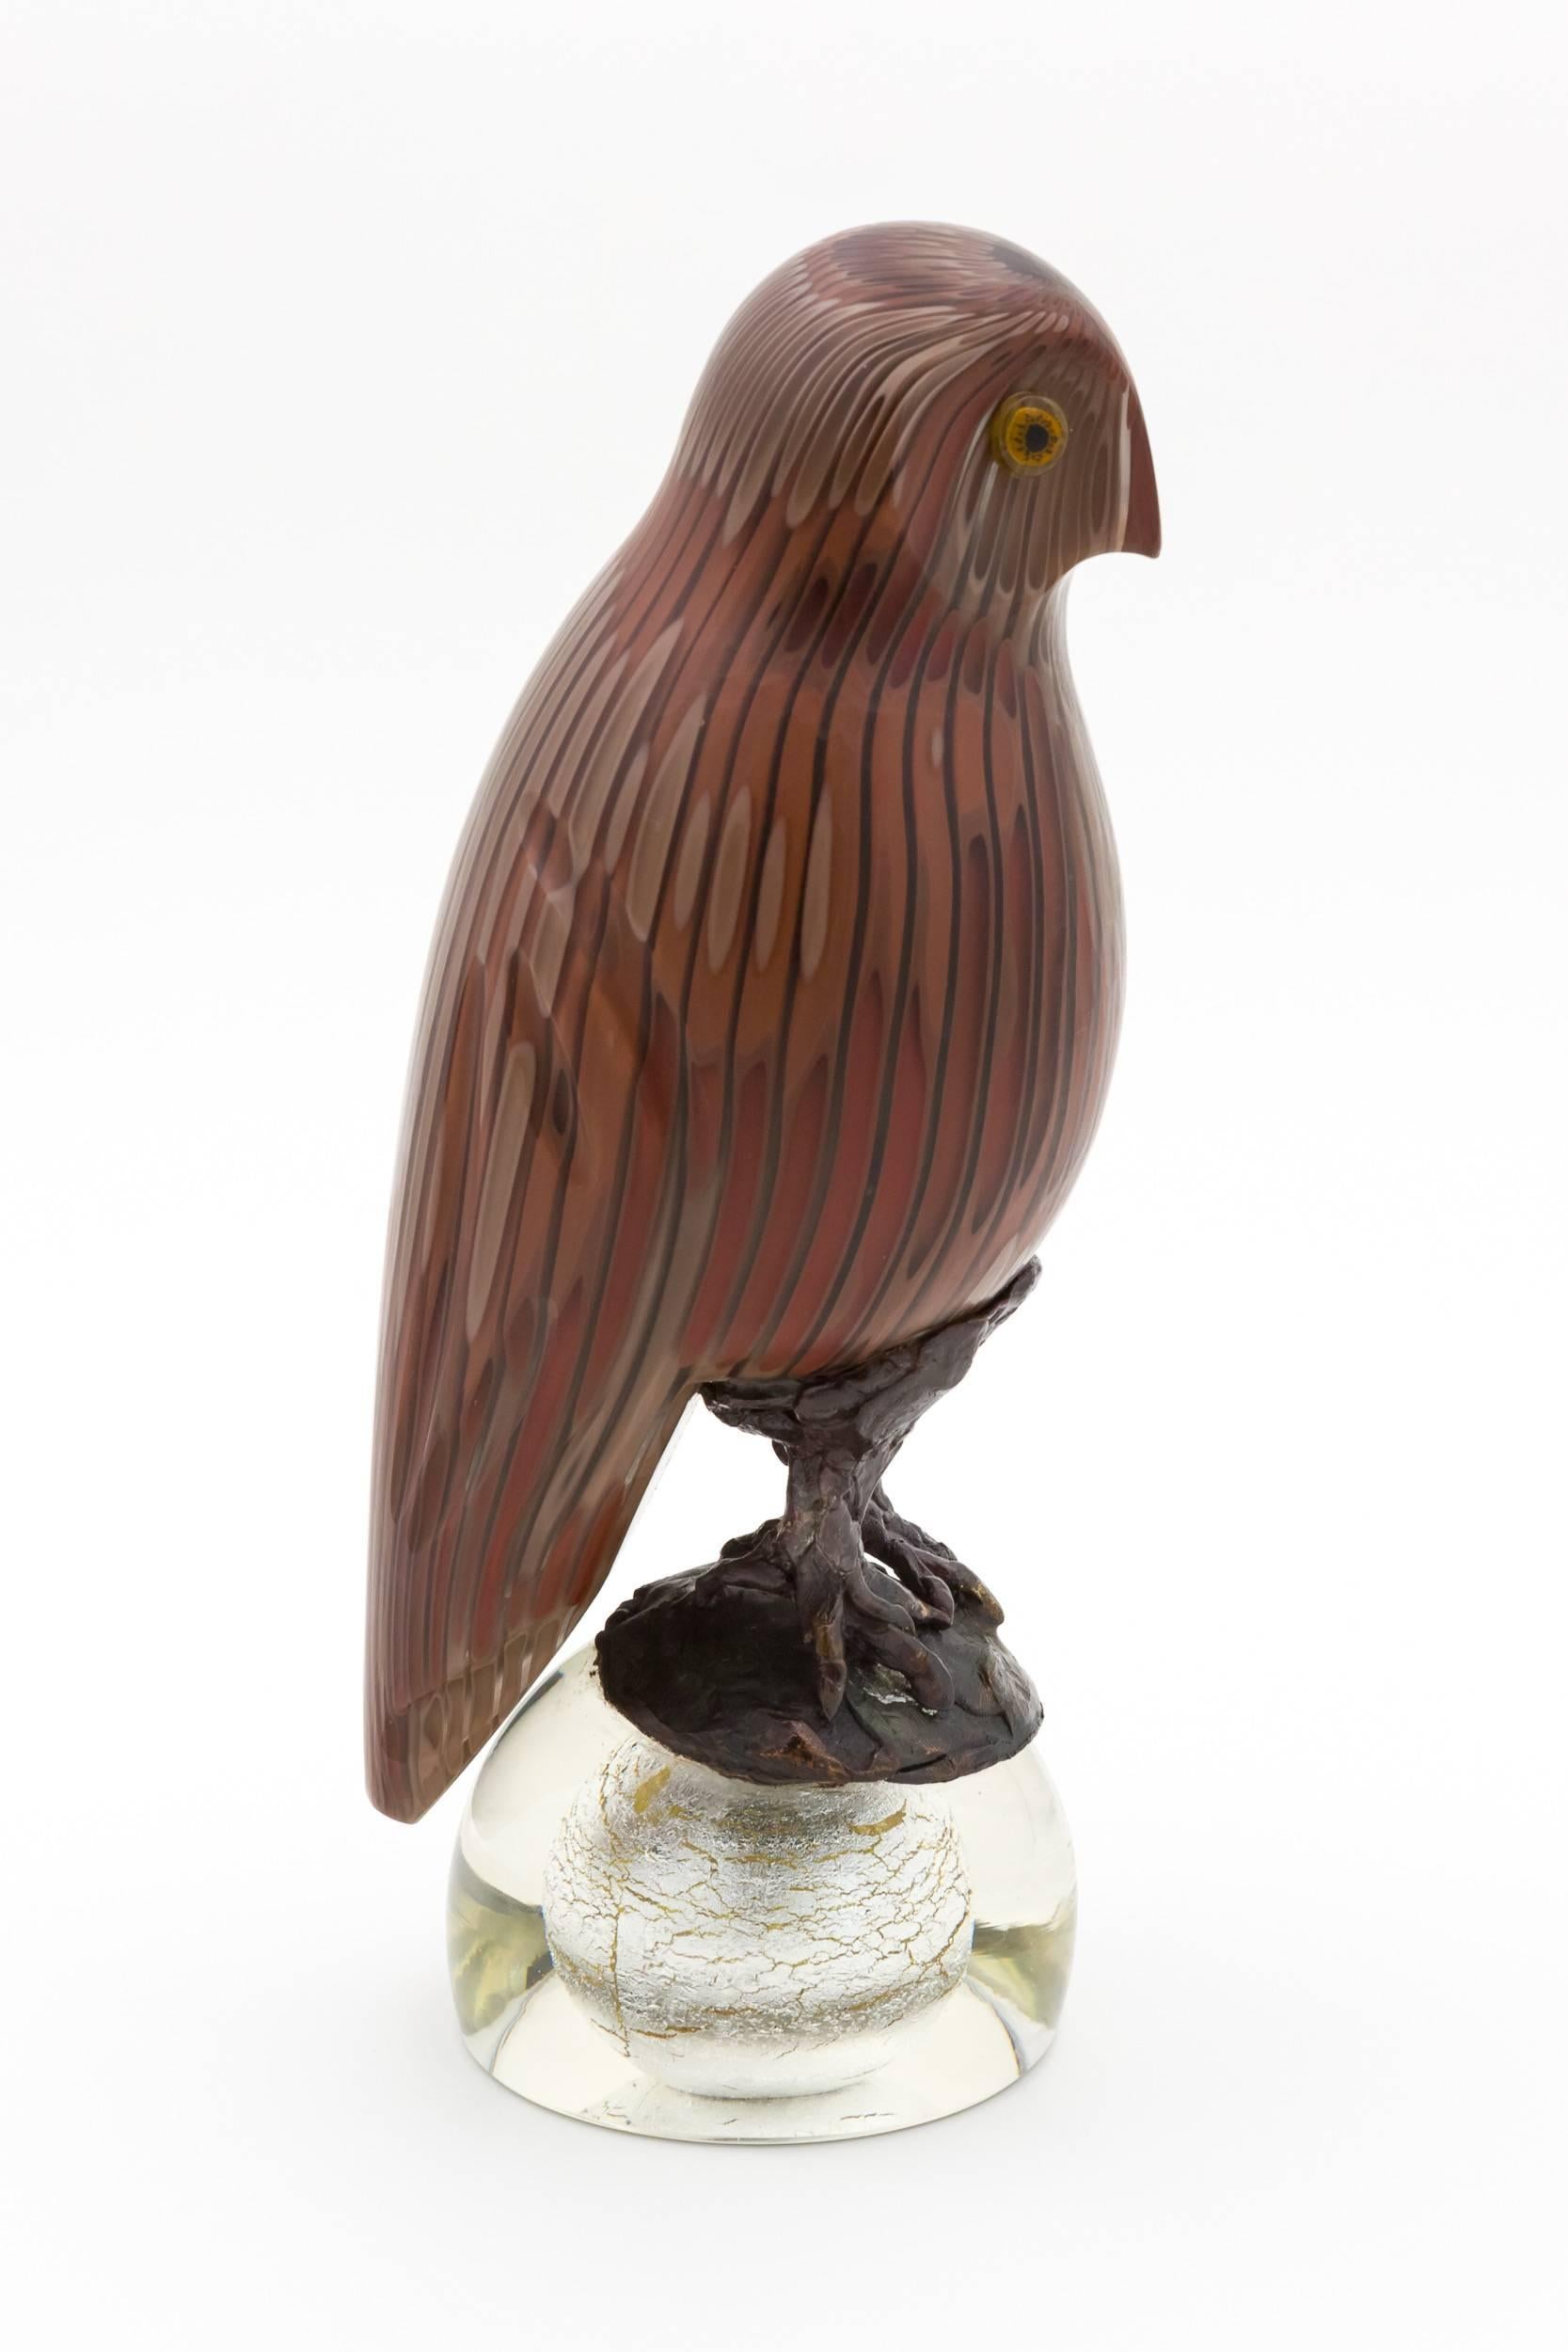 Rare figure of an owl designed by Toni Zuccheri for the famous manufacture Venini in Murano (Italy).
A cane glass entirely carved by hand on a bronze foot.
Note the lovely silver inclusion base.